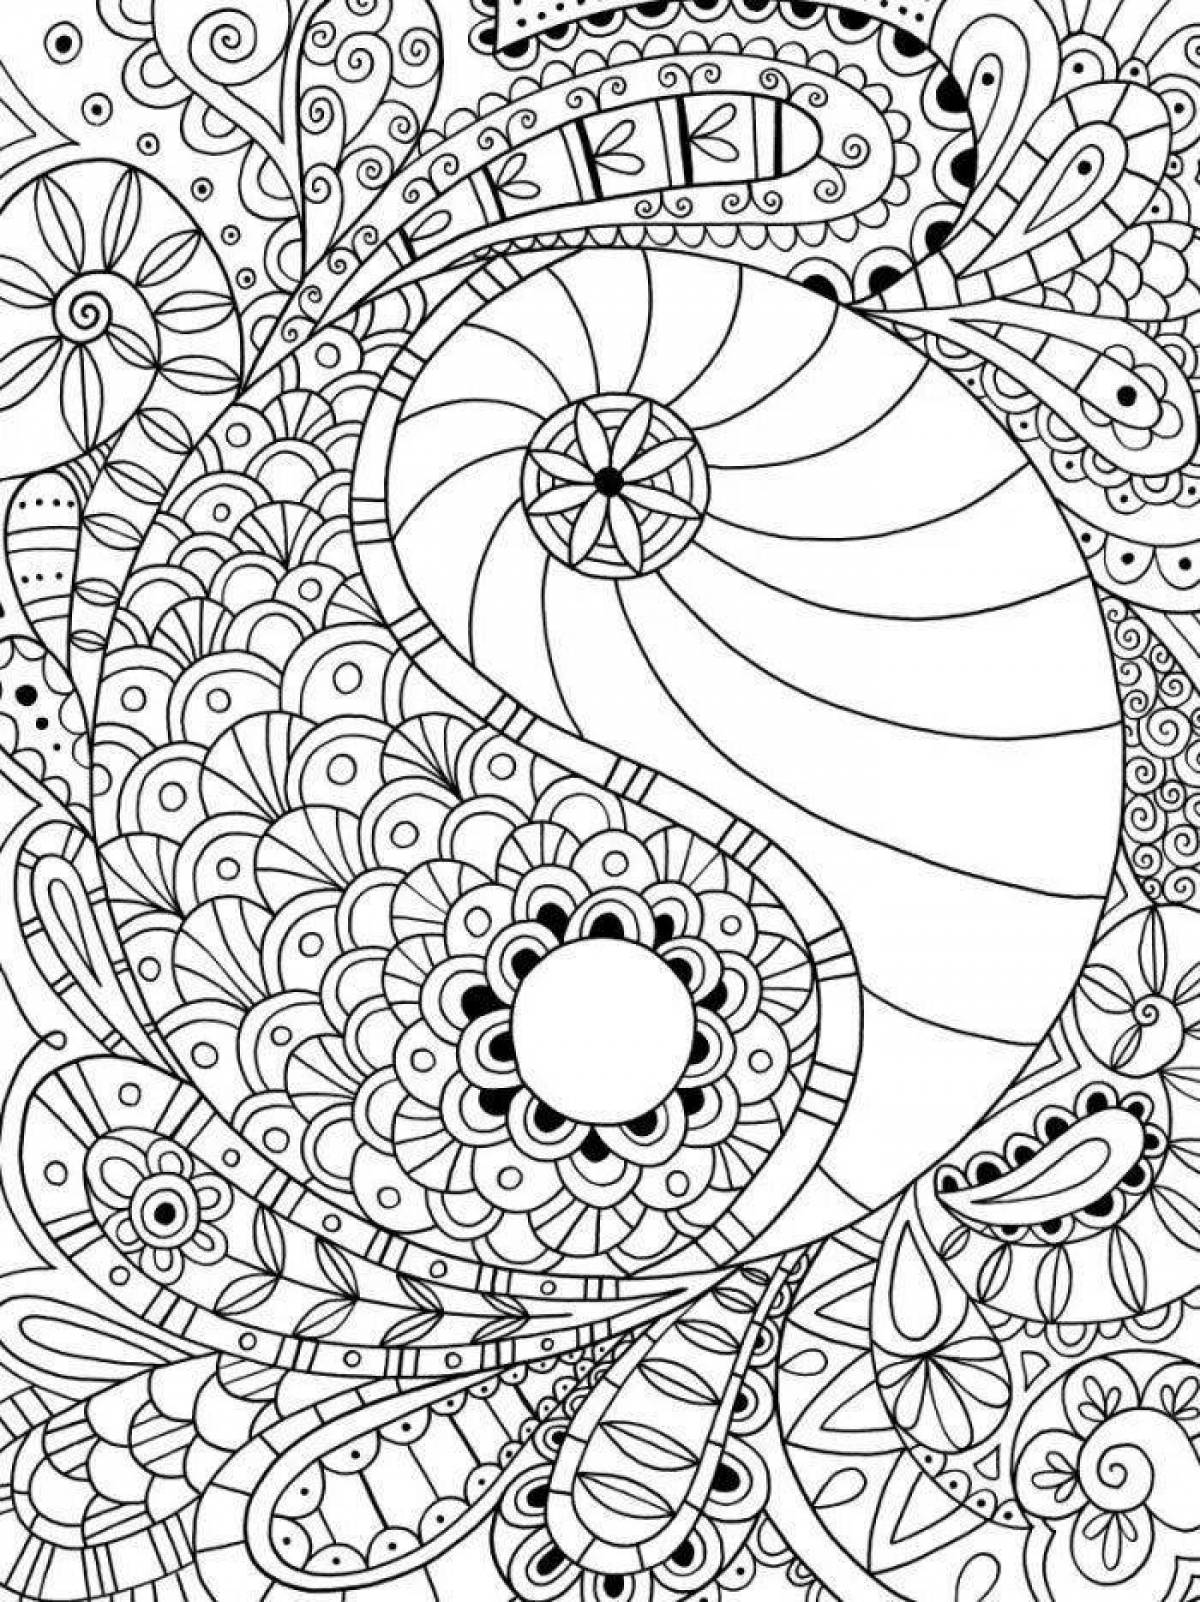 Colorful gel pen coloring page